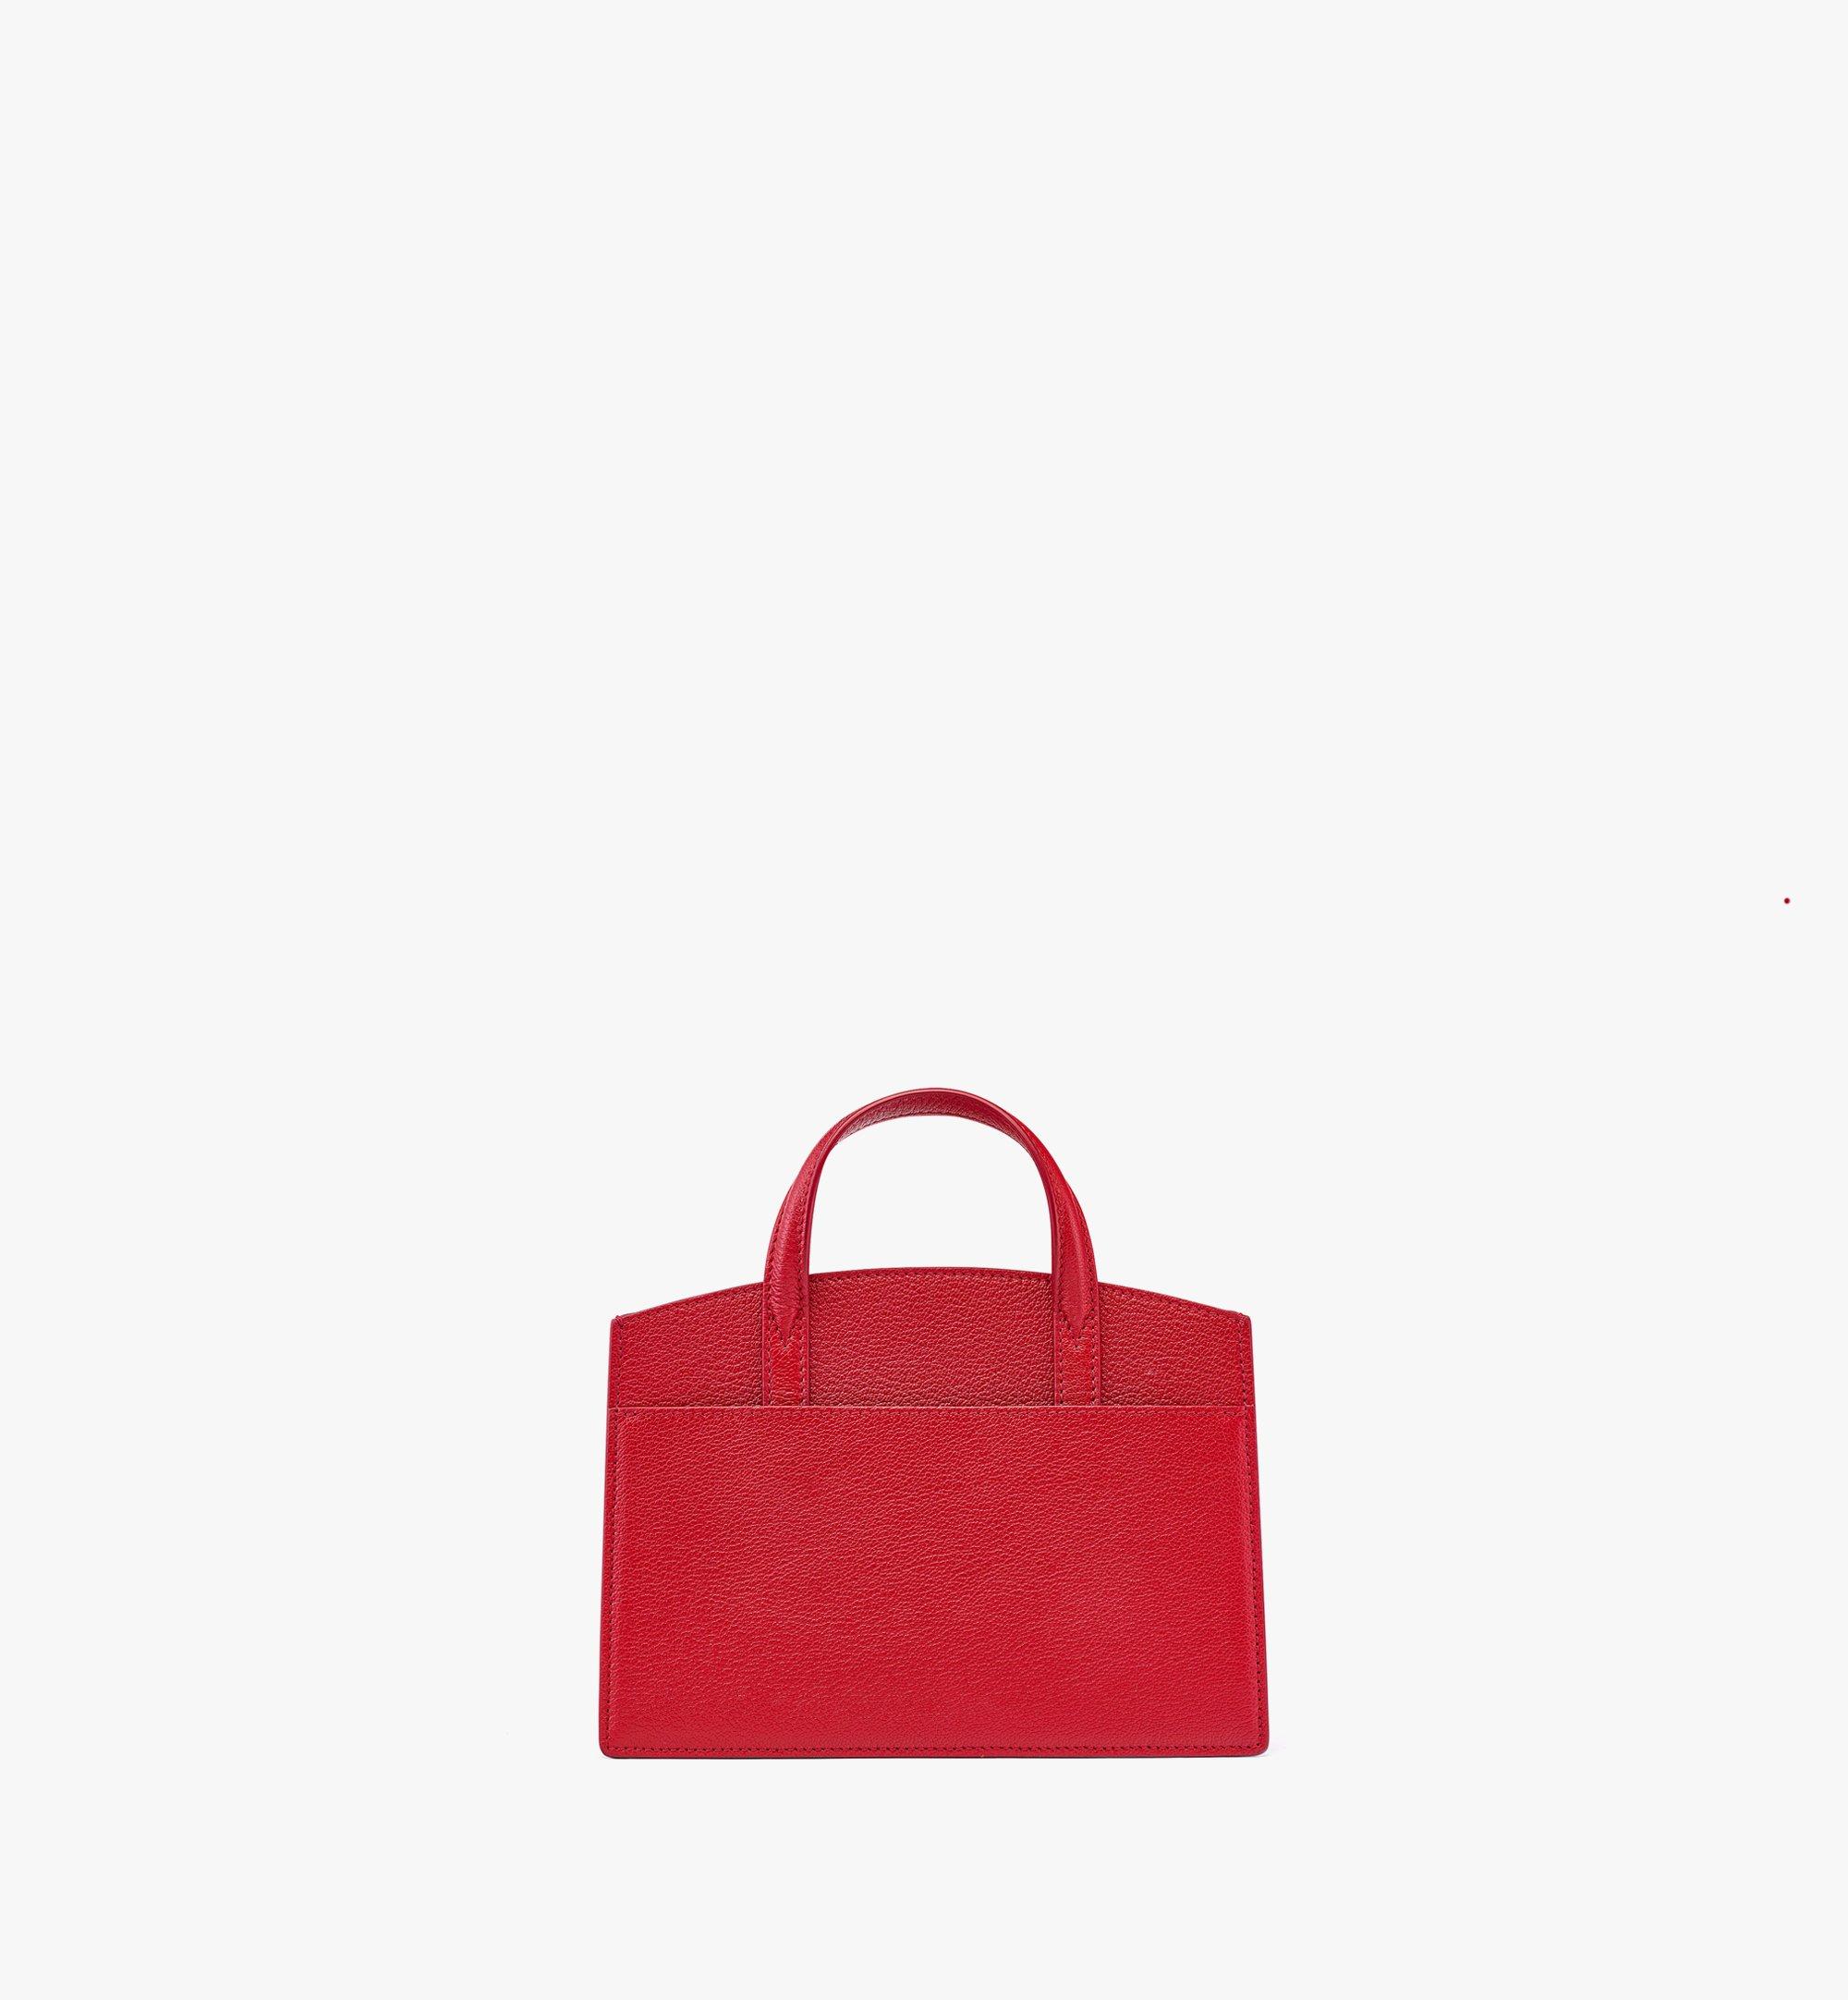 MCM Upcycling Project Jewelry Milano Tote in Goatskin Leather Red MWTCSUP02RU001 Alternate View 3